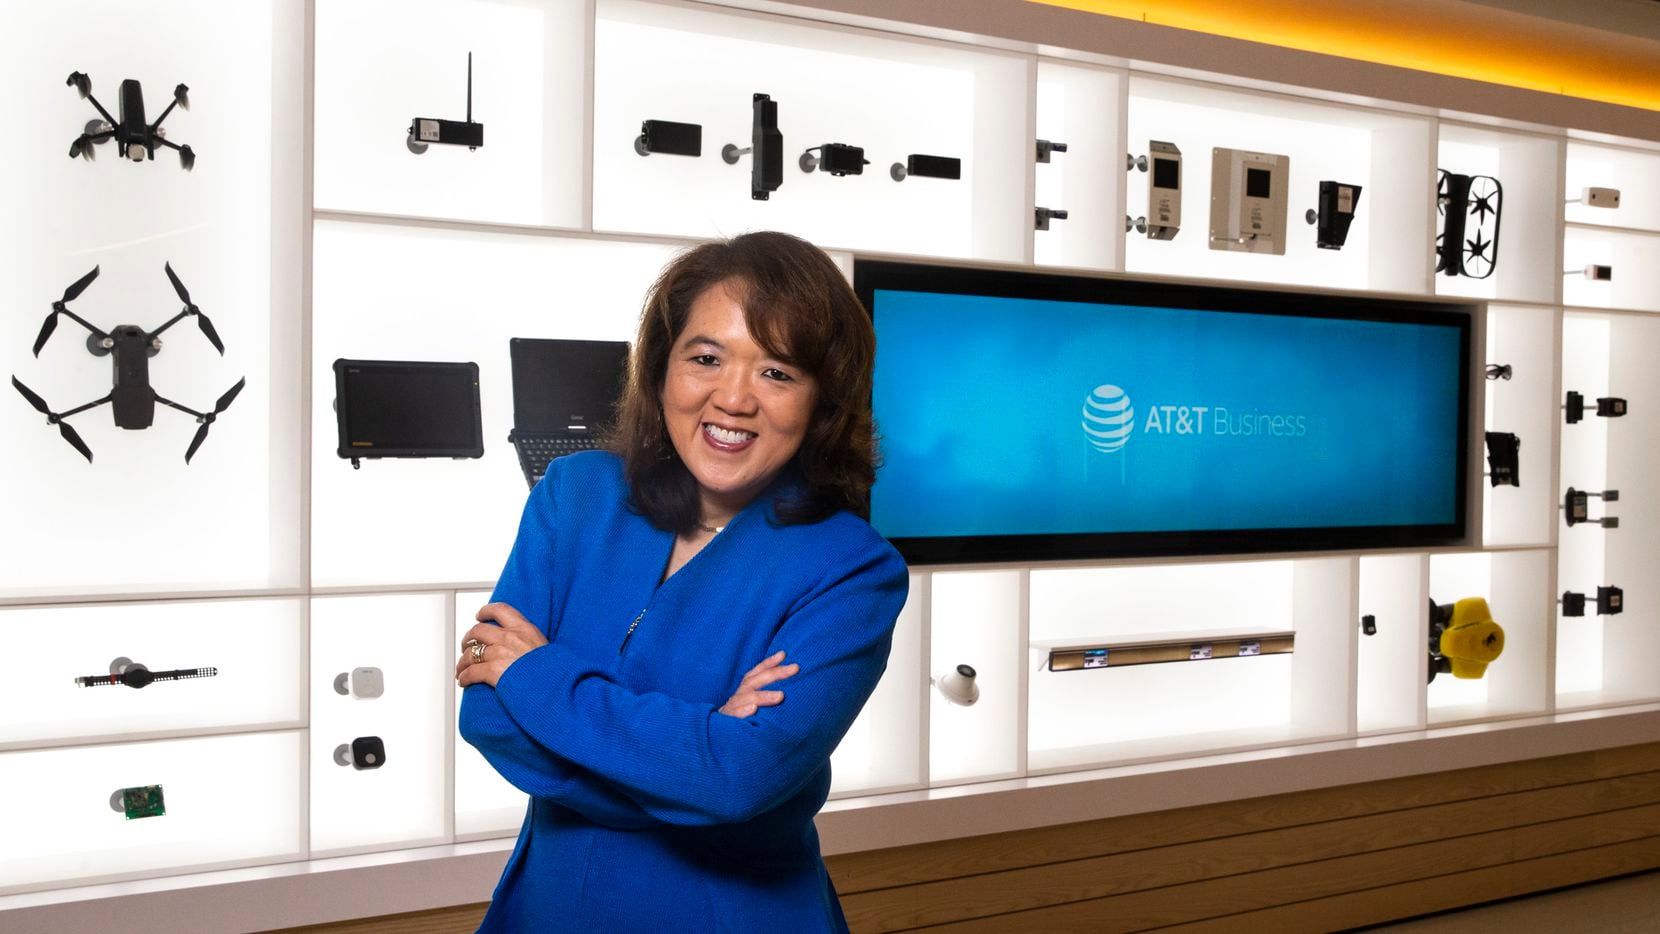 AT&T Business CEO Anne Chow poses for a portrait at the AT&T corporate headquarters in downtown Dallas. Promoted to her current post in September, Chow has agreed to chair the 2020-21 annual campaign for United Way of Metropolitan Dallas and is the first woman executive to do so.